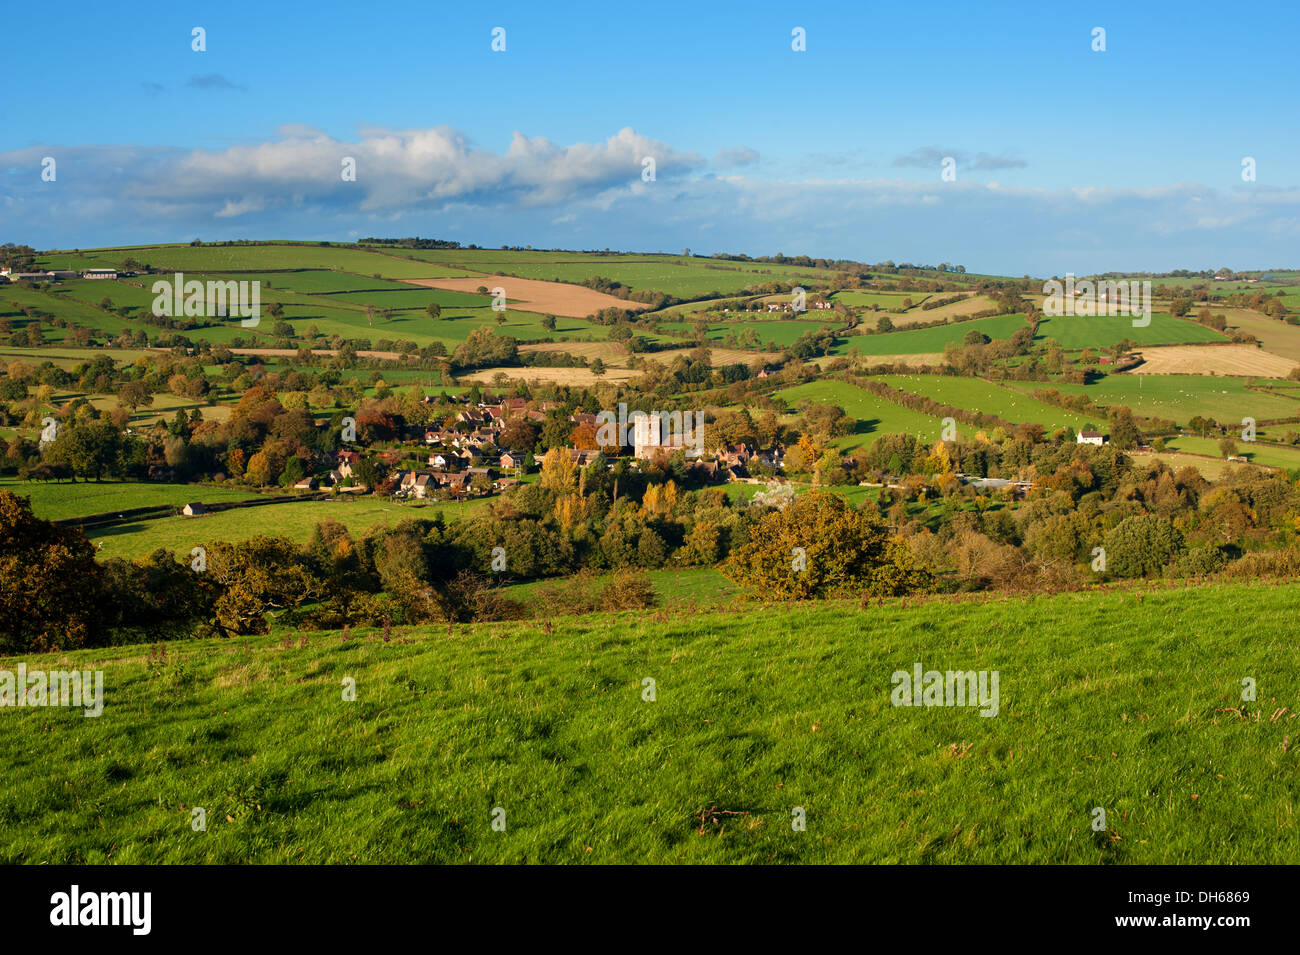 The village of Cardington in the Shropshire hills, England Stock Photo